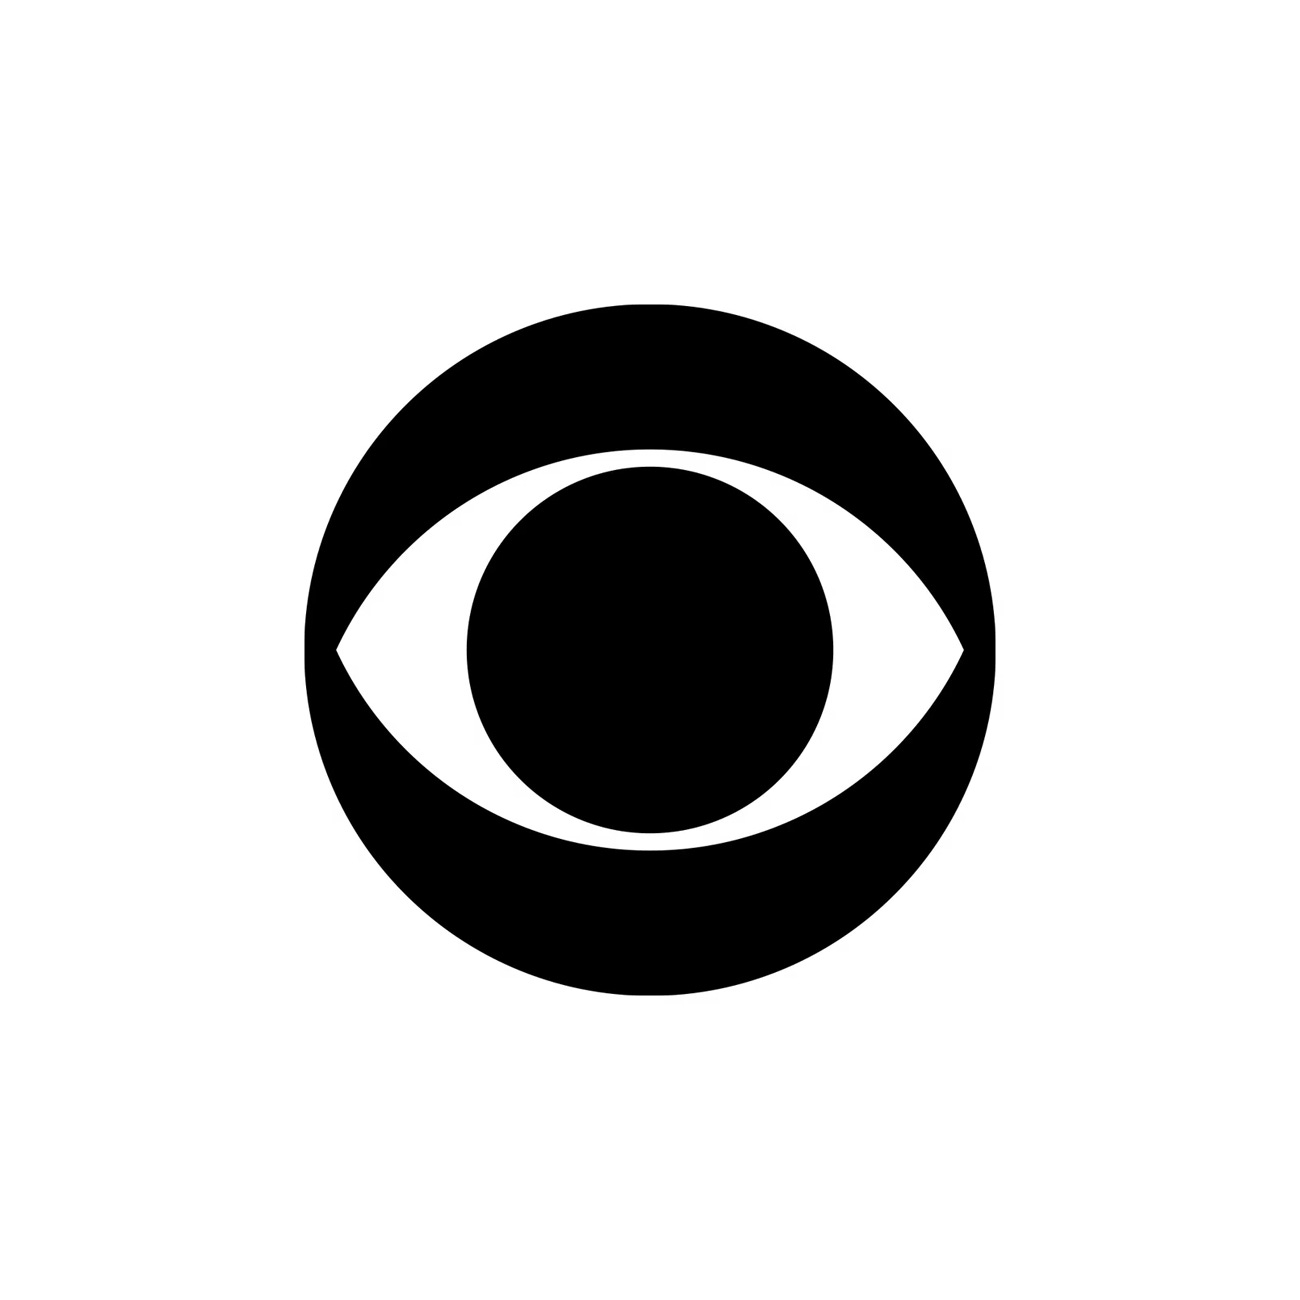 William Golden's 1951 logo for CBS Television Network.